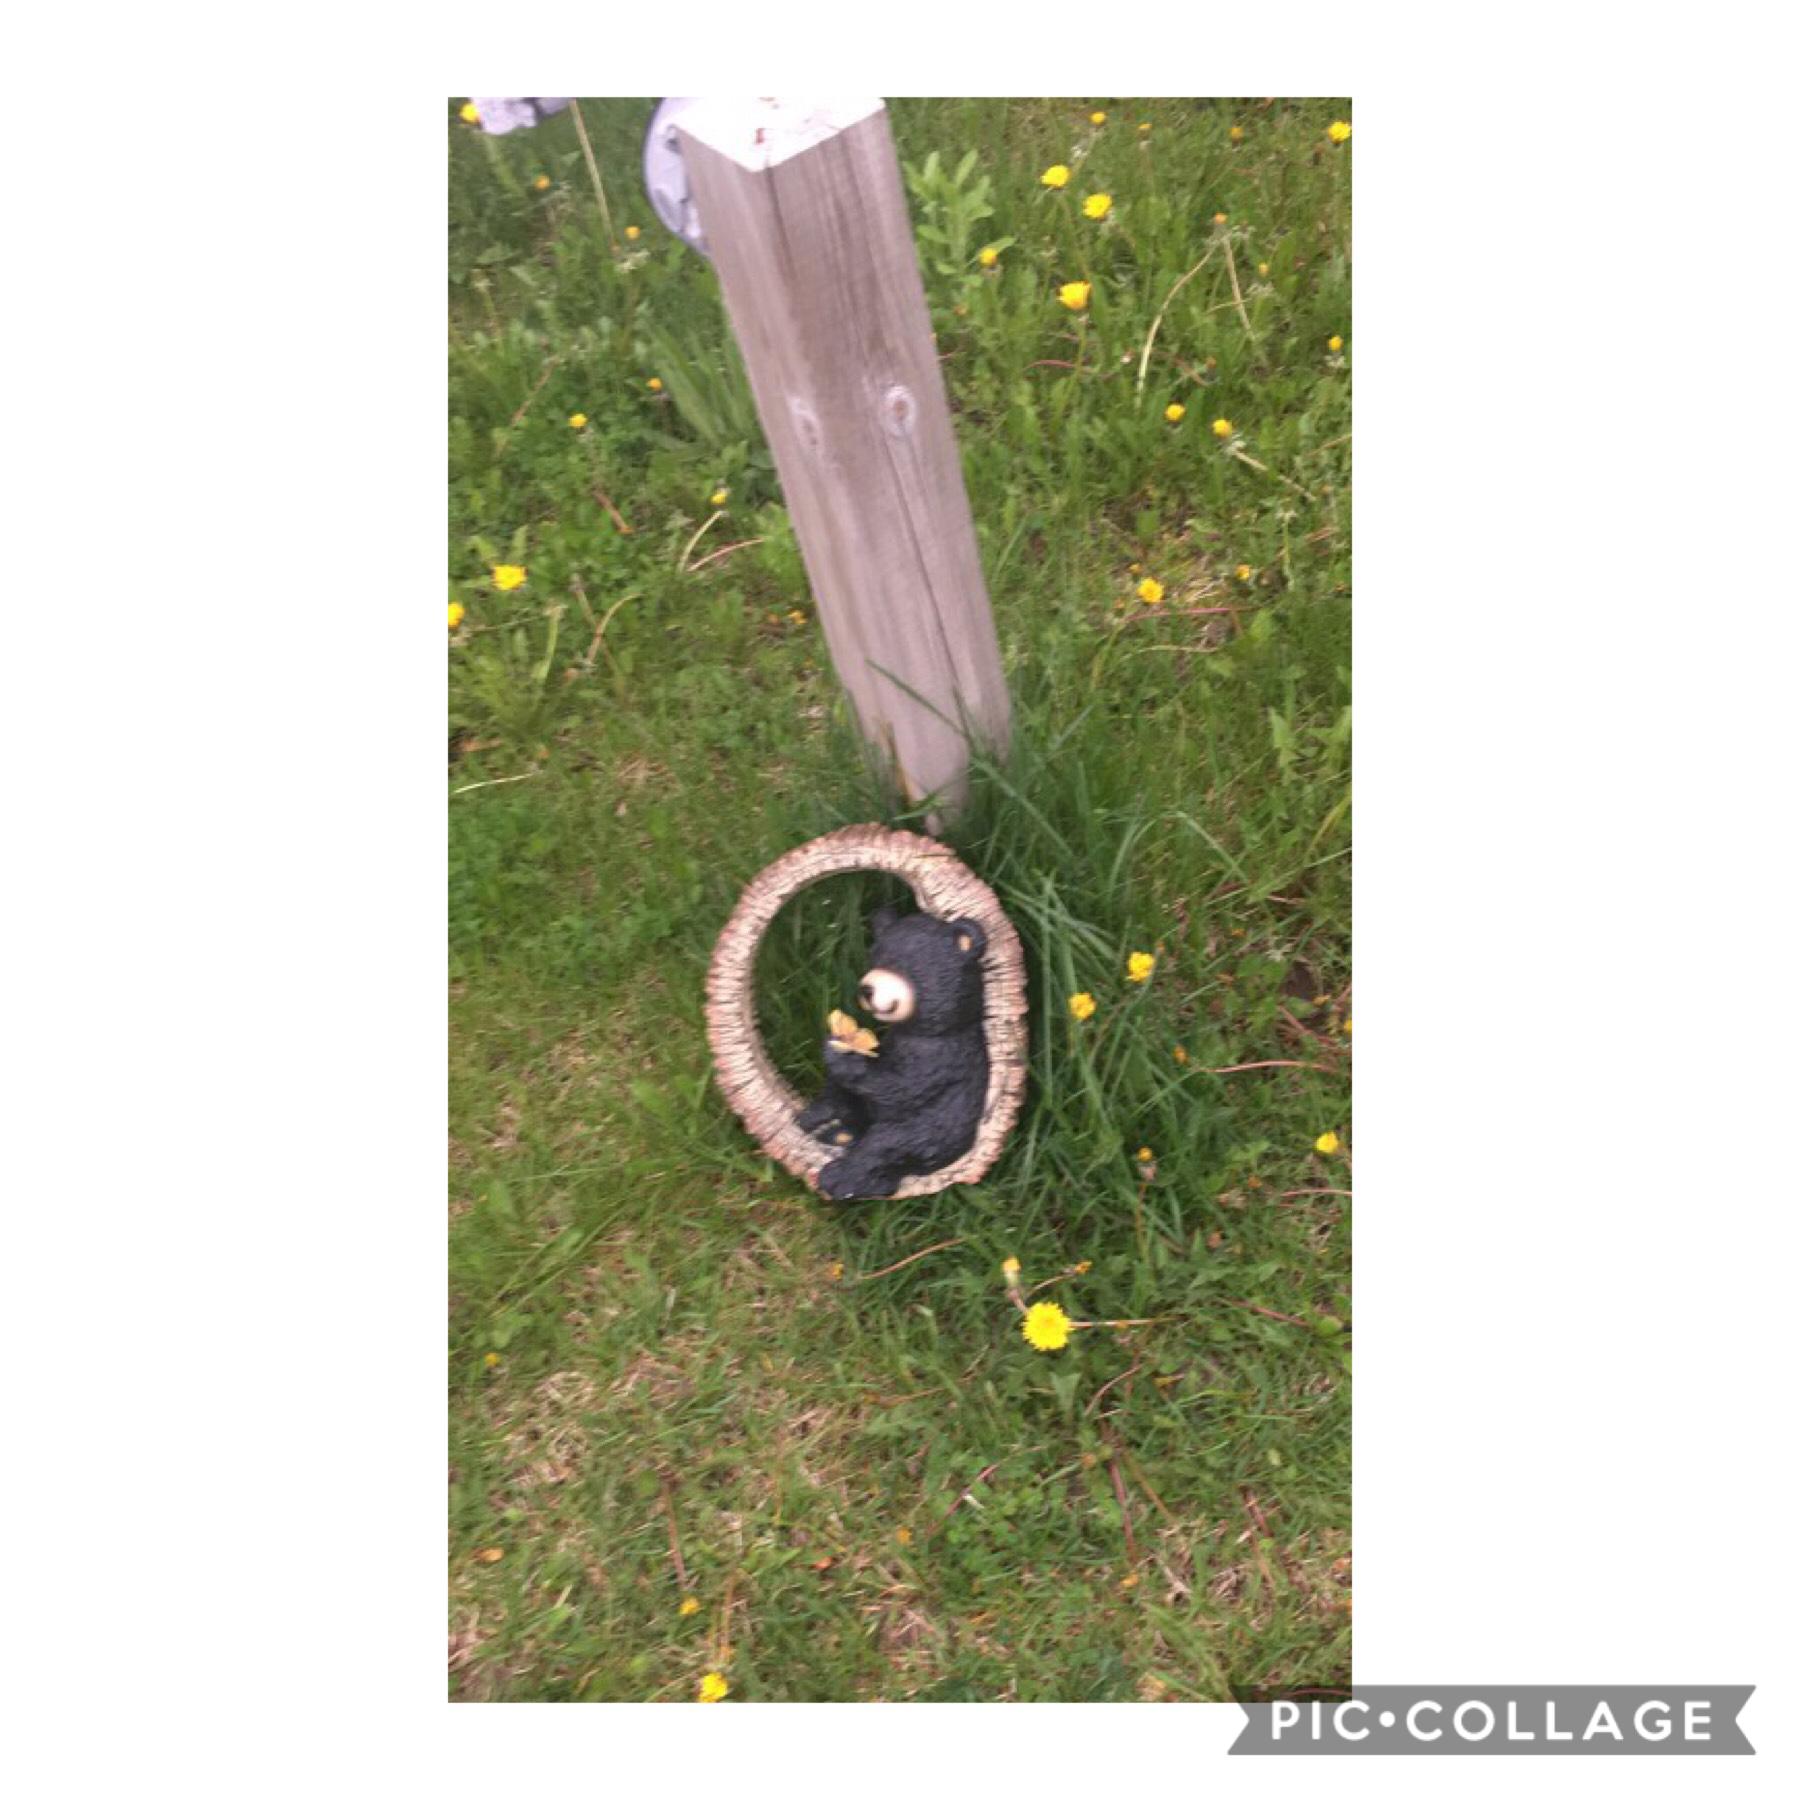 this lil solar powered bear&log has been on this one persons property for like two weeks now but they didn't put it there, it just showed up there one day and there it shall stay. it disappeared for like a day then reappeared the next day.